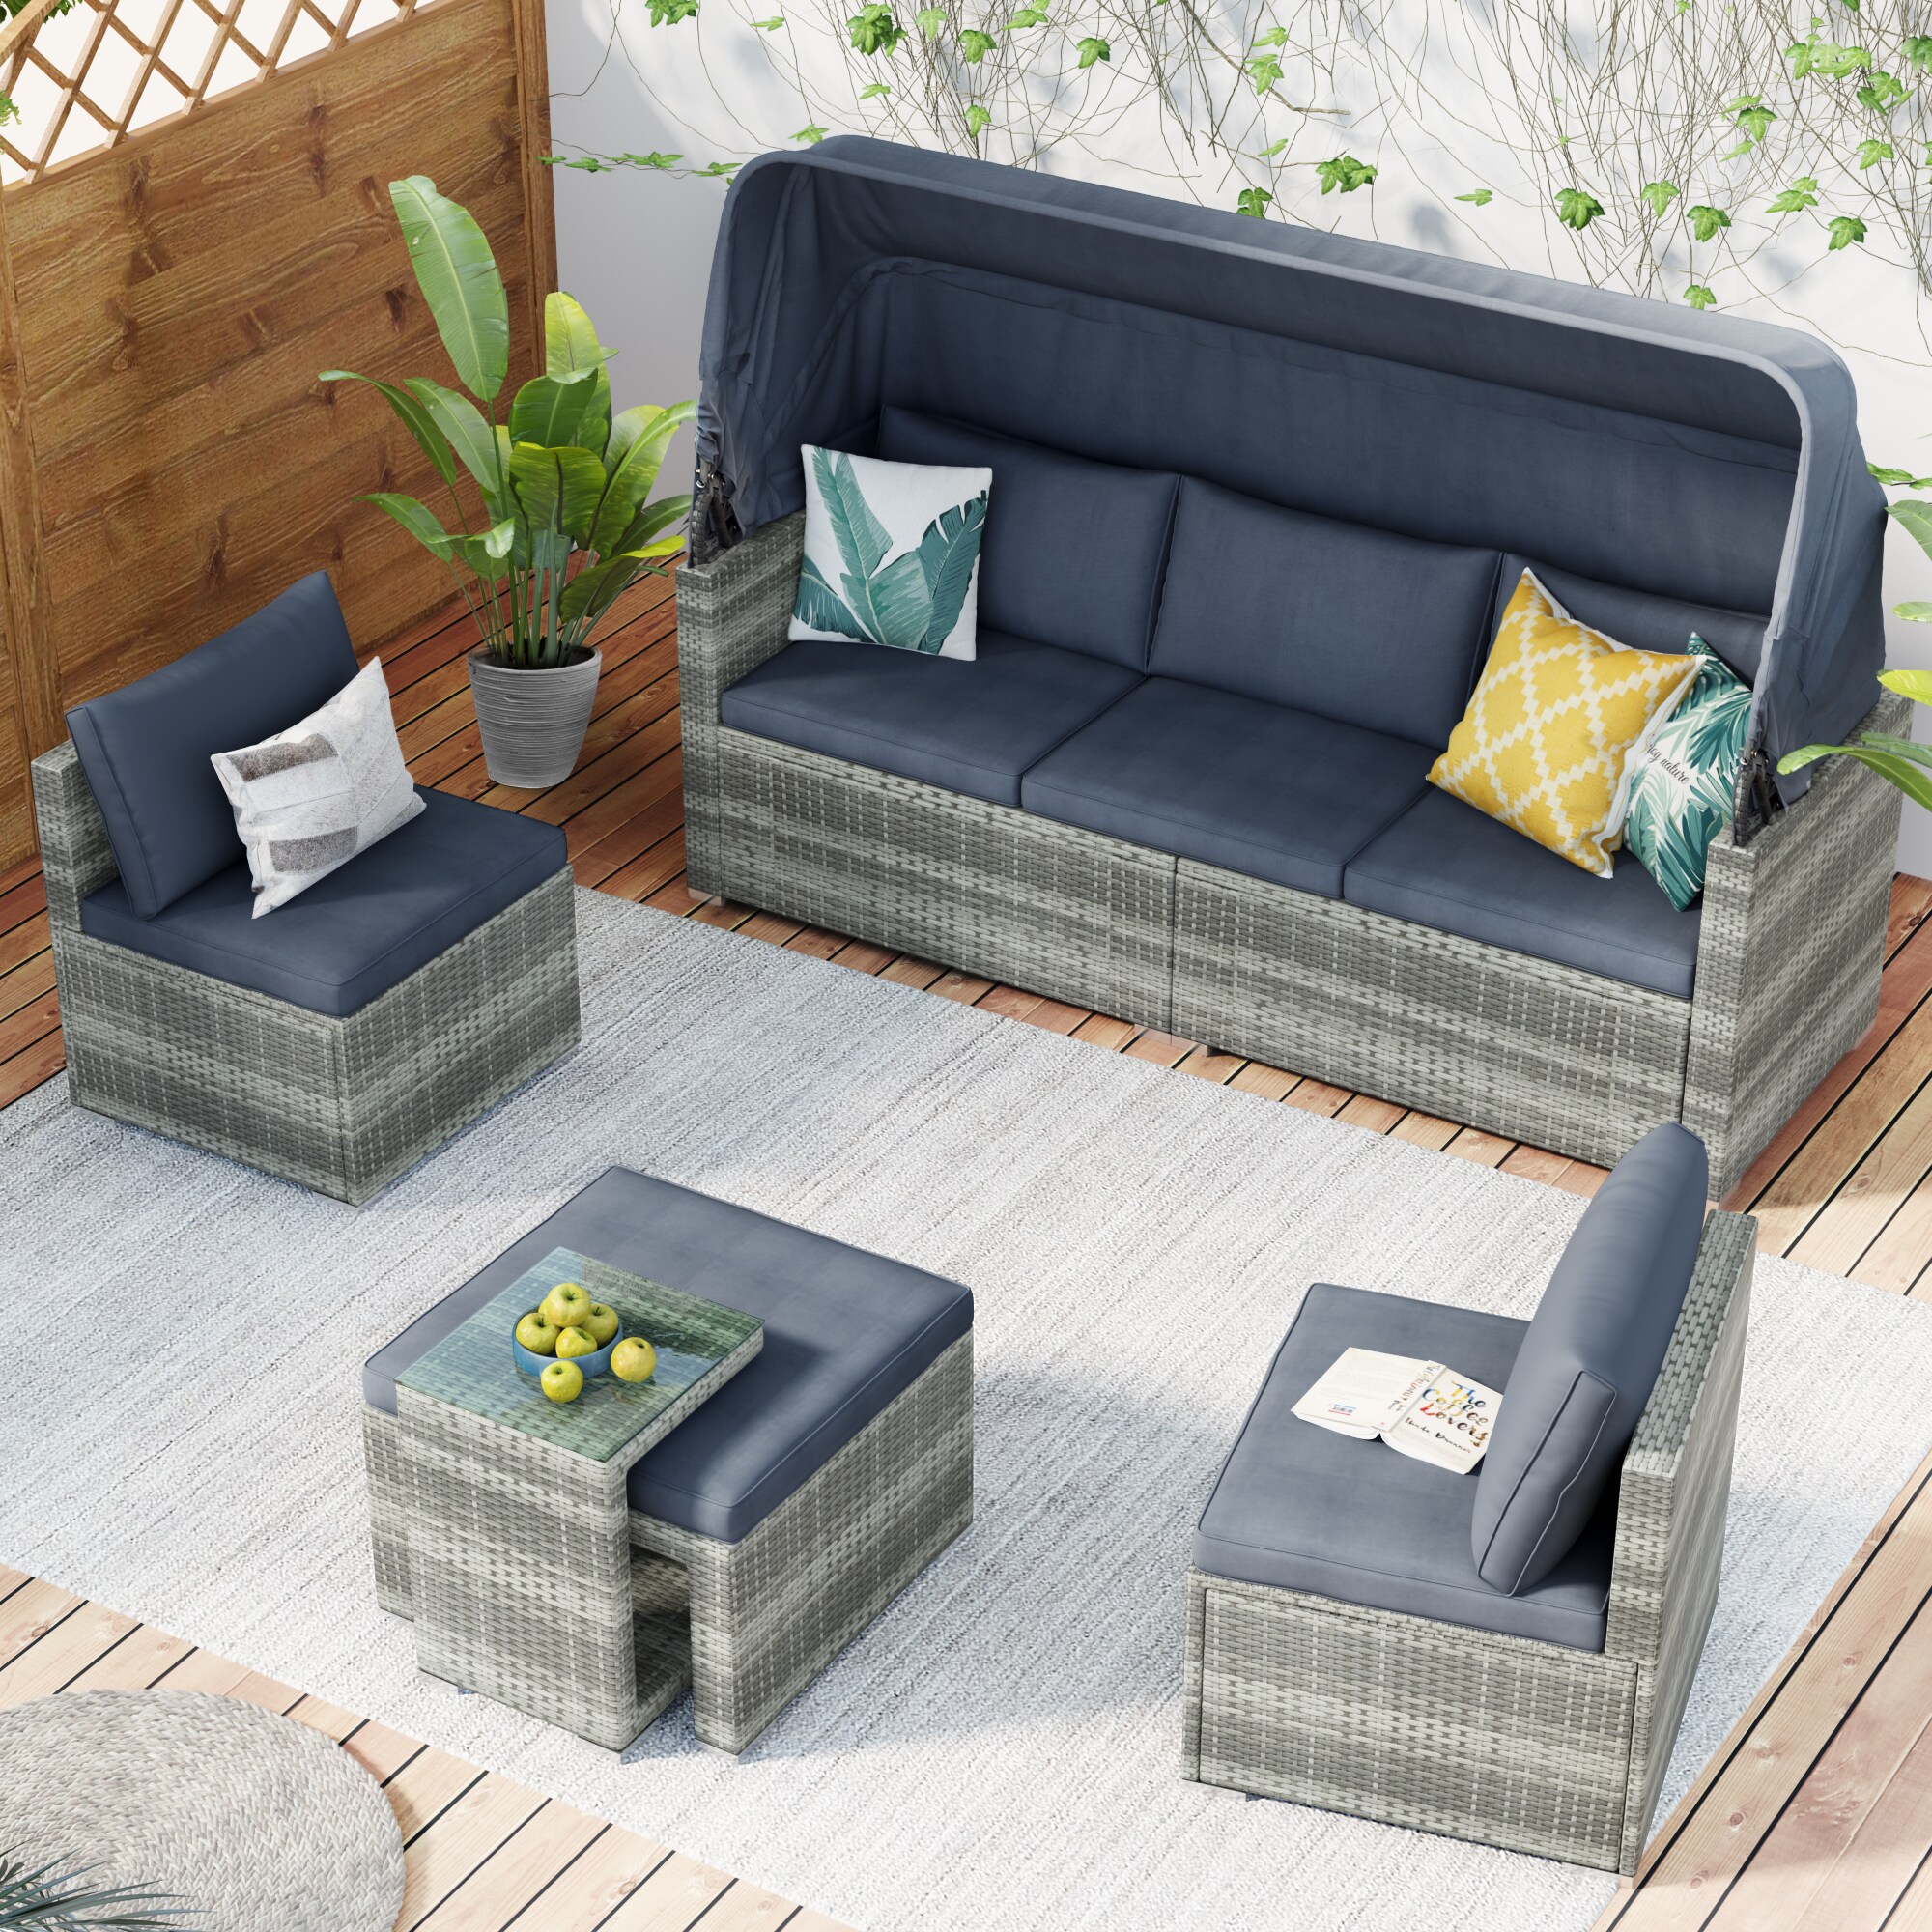 Conversation the 4-Piece in with at Conversation Cushions Patio department Patio Gray Rattan Set Clihome Sets